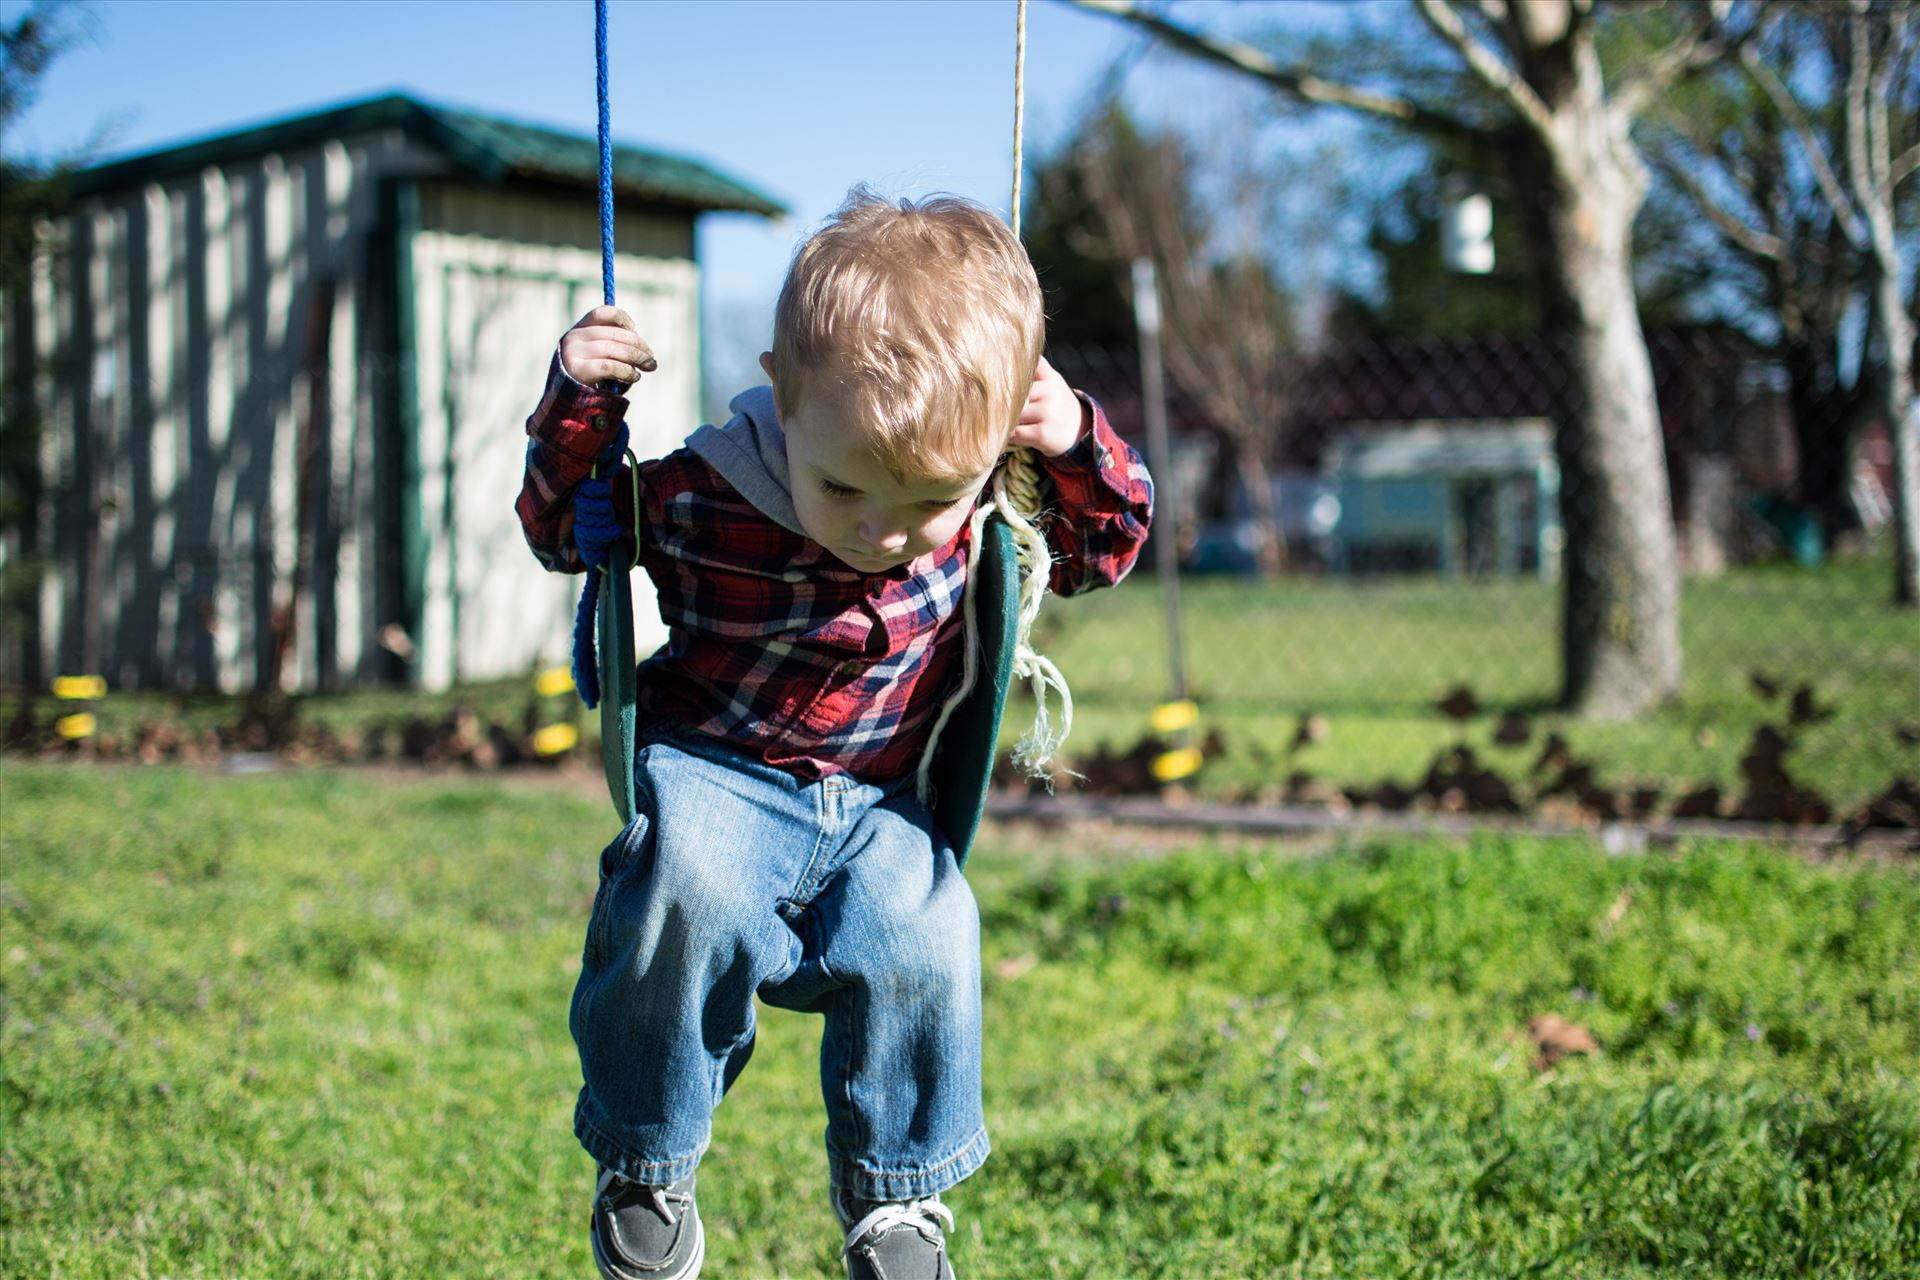 On the Swing -  by Unbound Photography